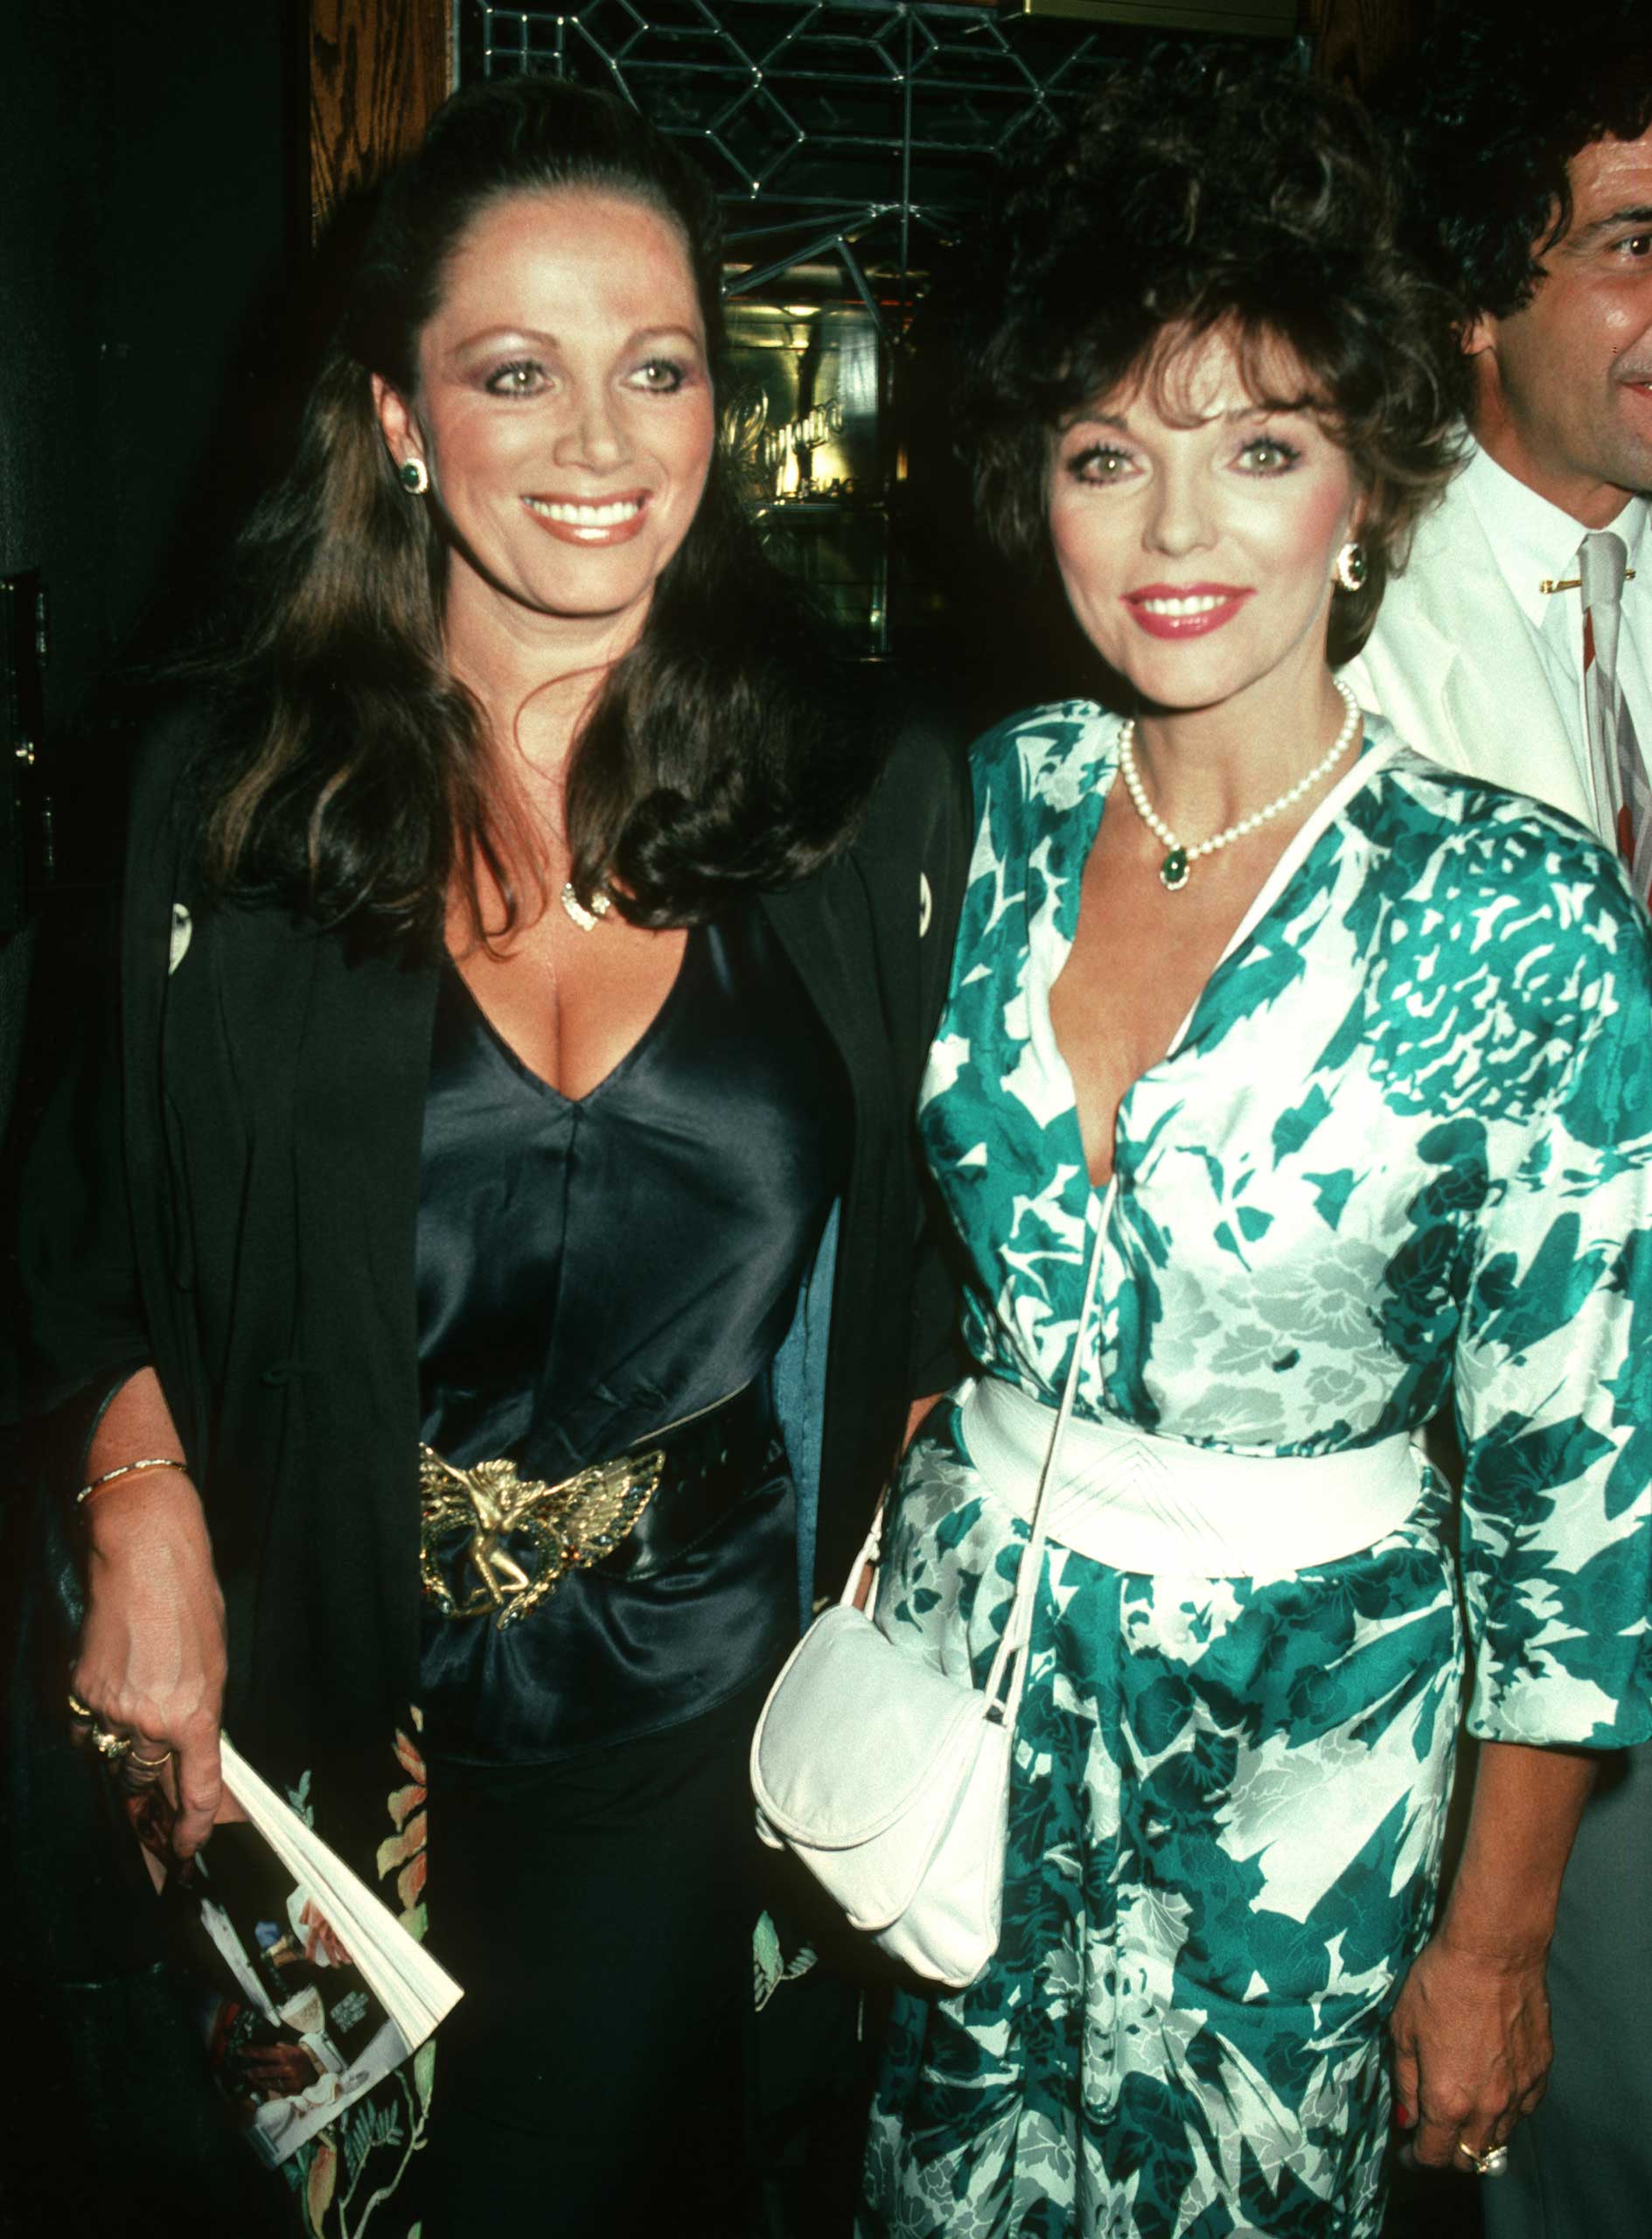 Jackie Collins' "Hollywood Wives" Book Party - July 26, 1983